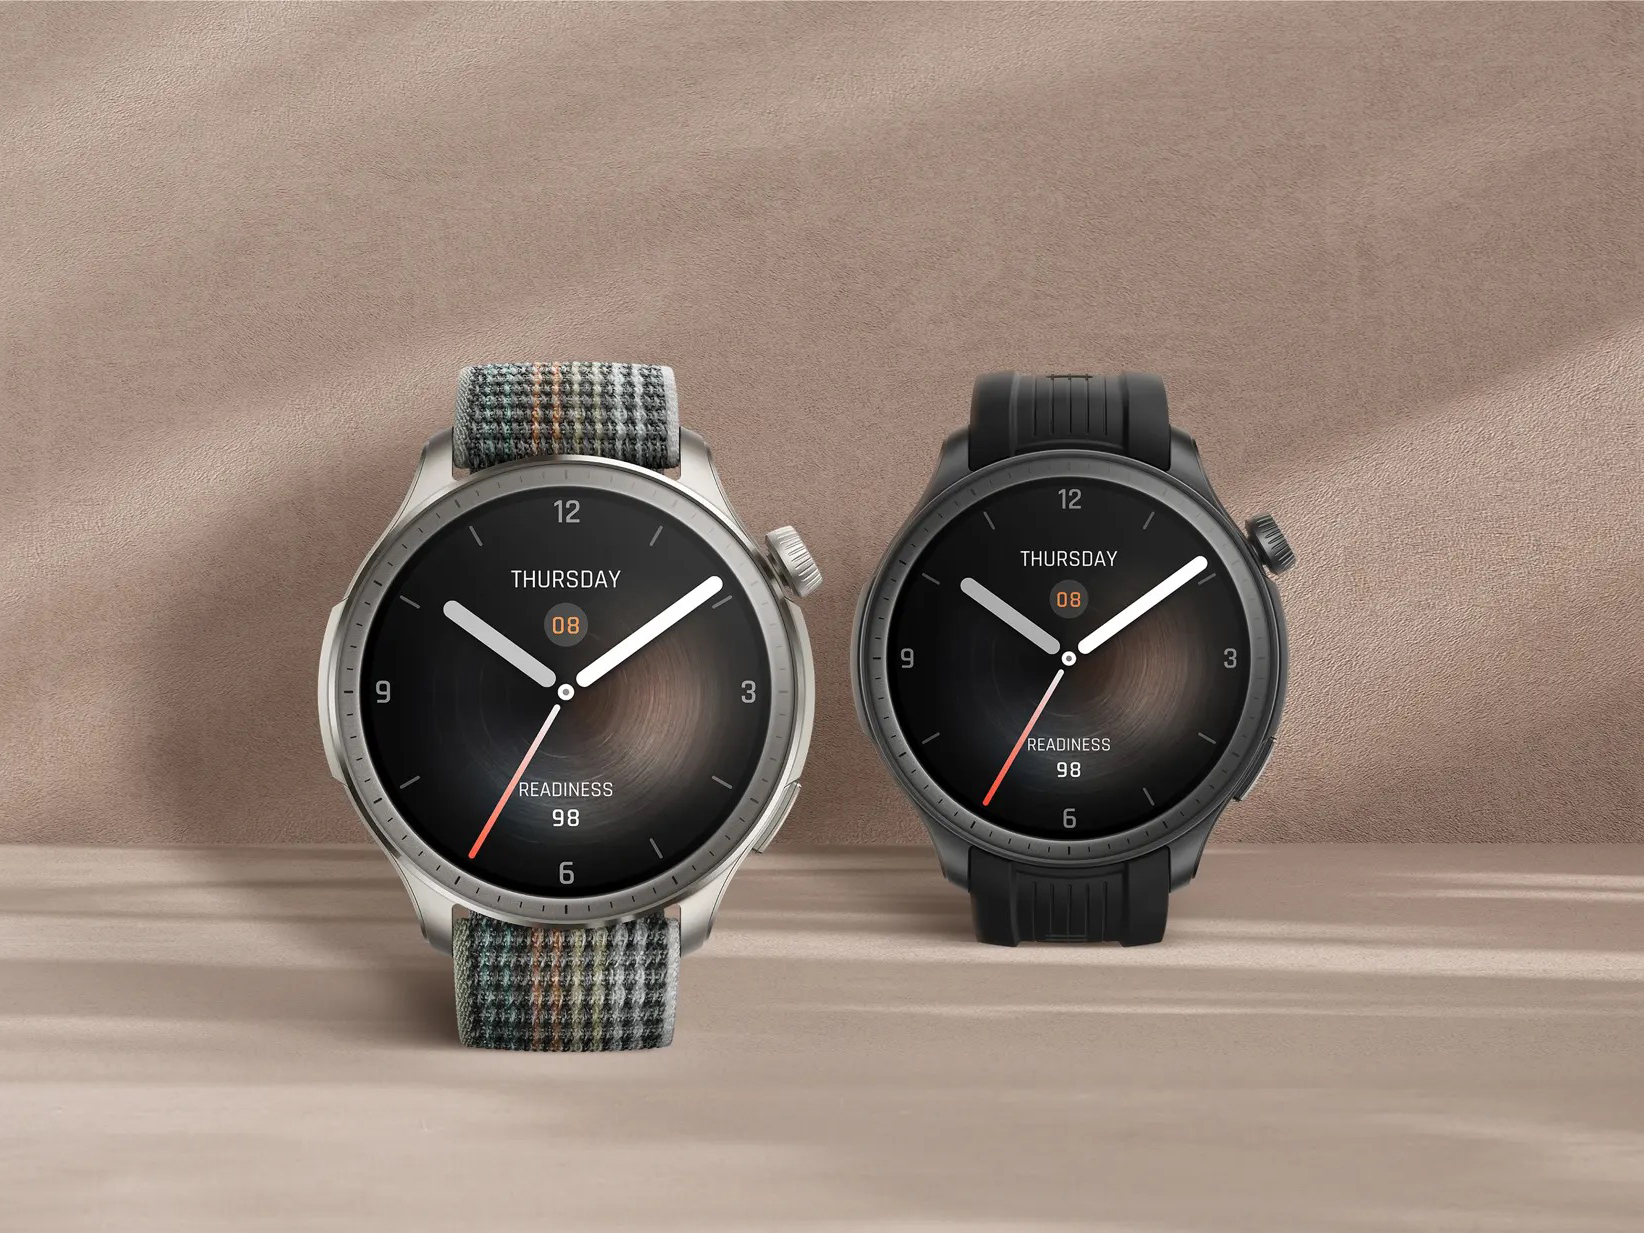 Amazfit Balance Lands In Malaysia At RM1,099 